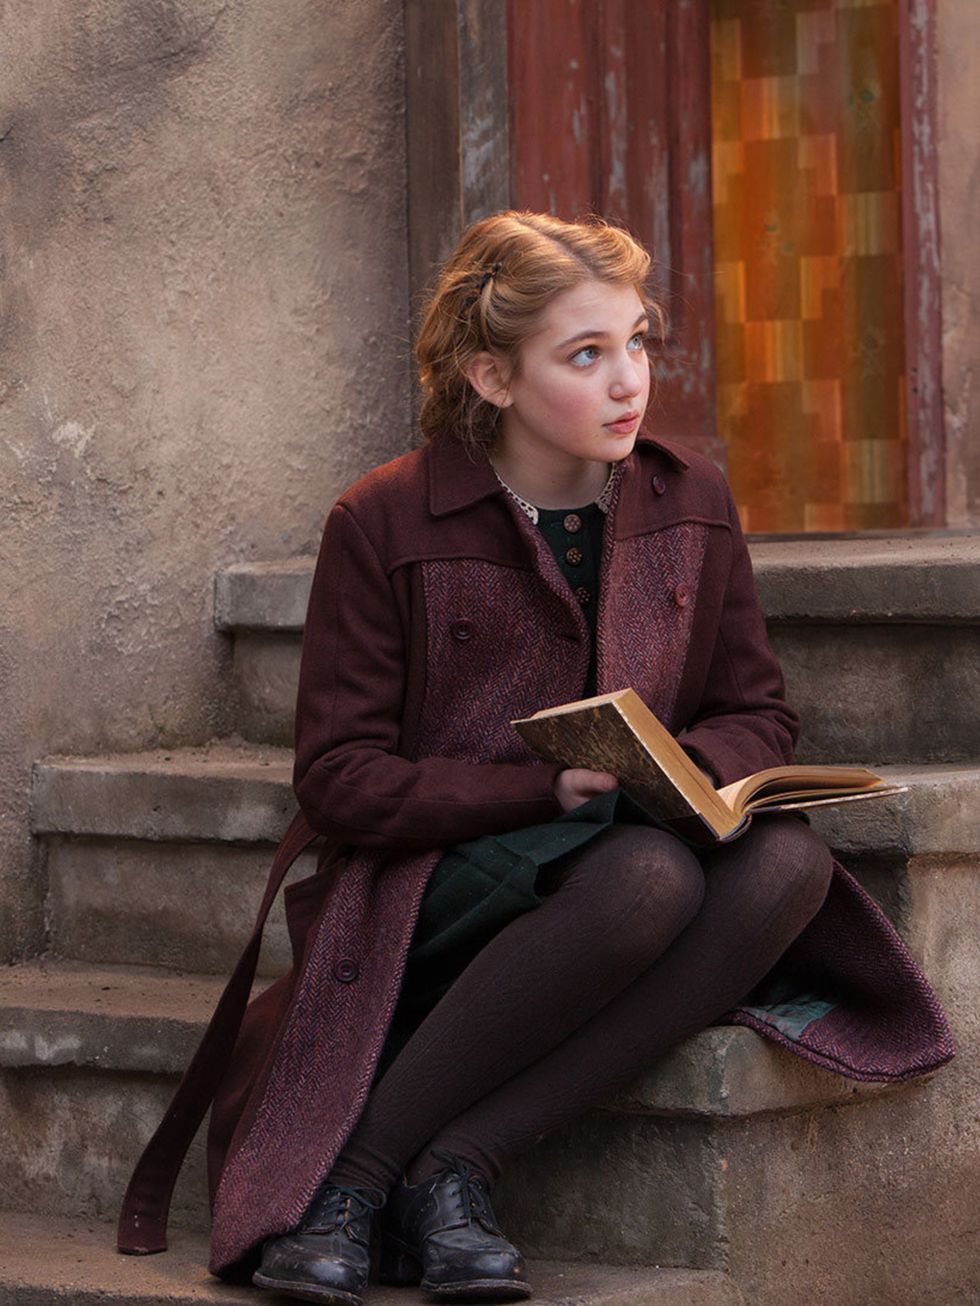 &lt;p&gt;&lt;strong&gt;FILM: The Book Thief&lt;/strong&gt;&lt;/p&gt;&lt;p&gt;Released earlier this week, &lt;em&gt;The Book Thief&lt;/em&gt; is set on the cusp of WWII in Nazi Germany, and centres on a young girl, Liesel Meminger, who steals books as a me